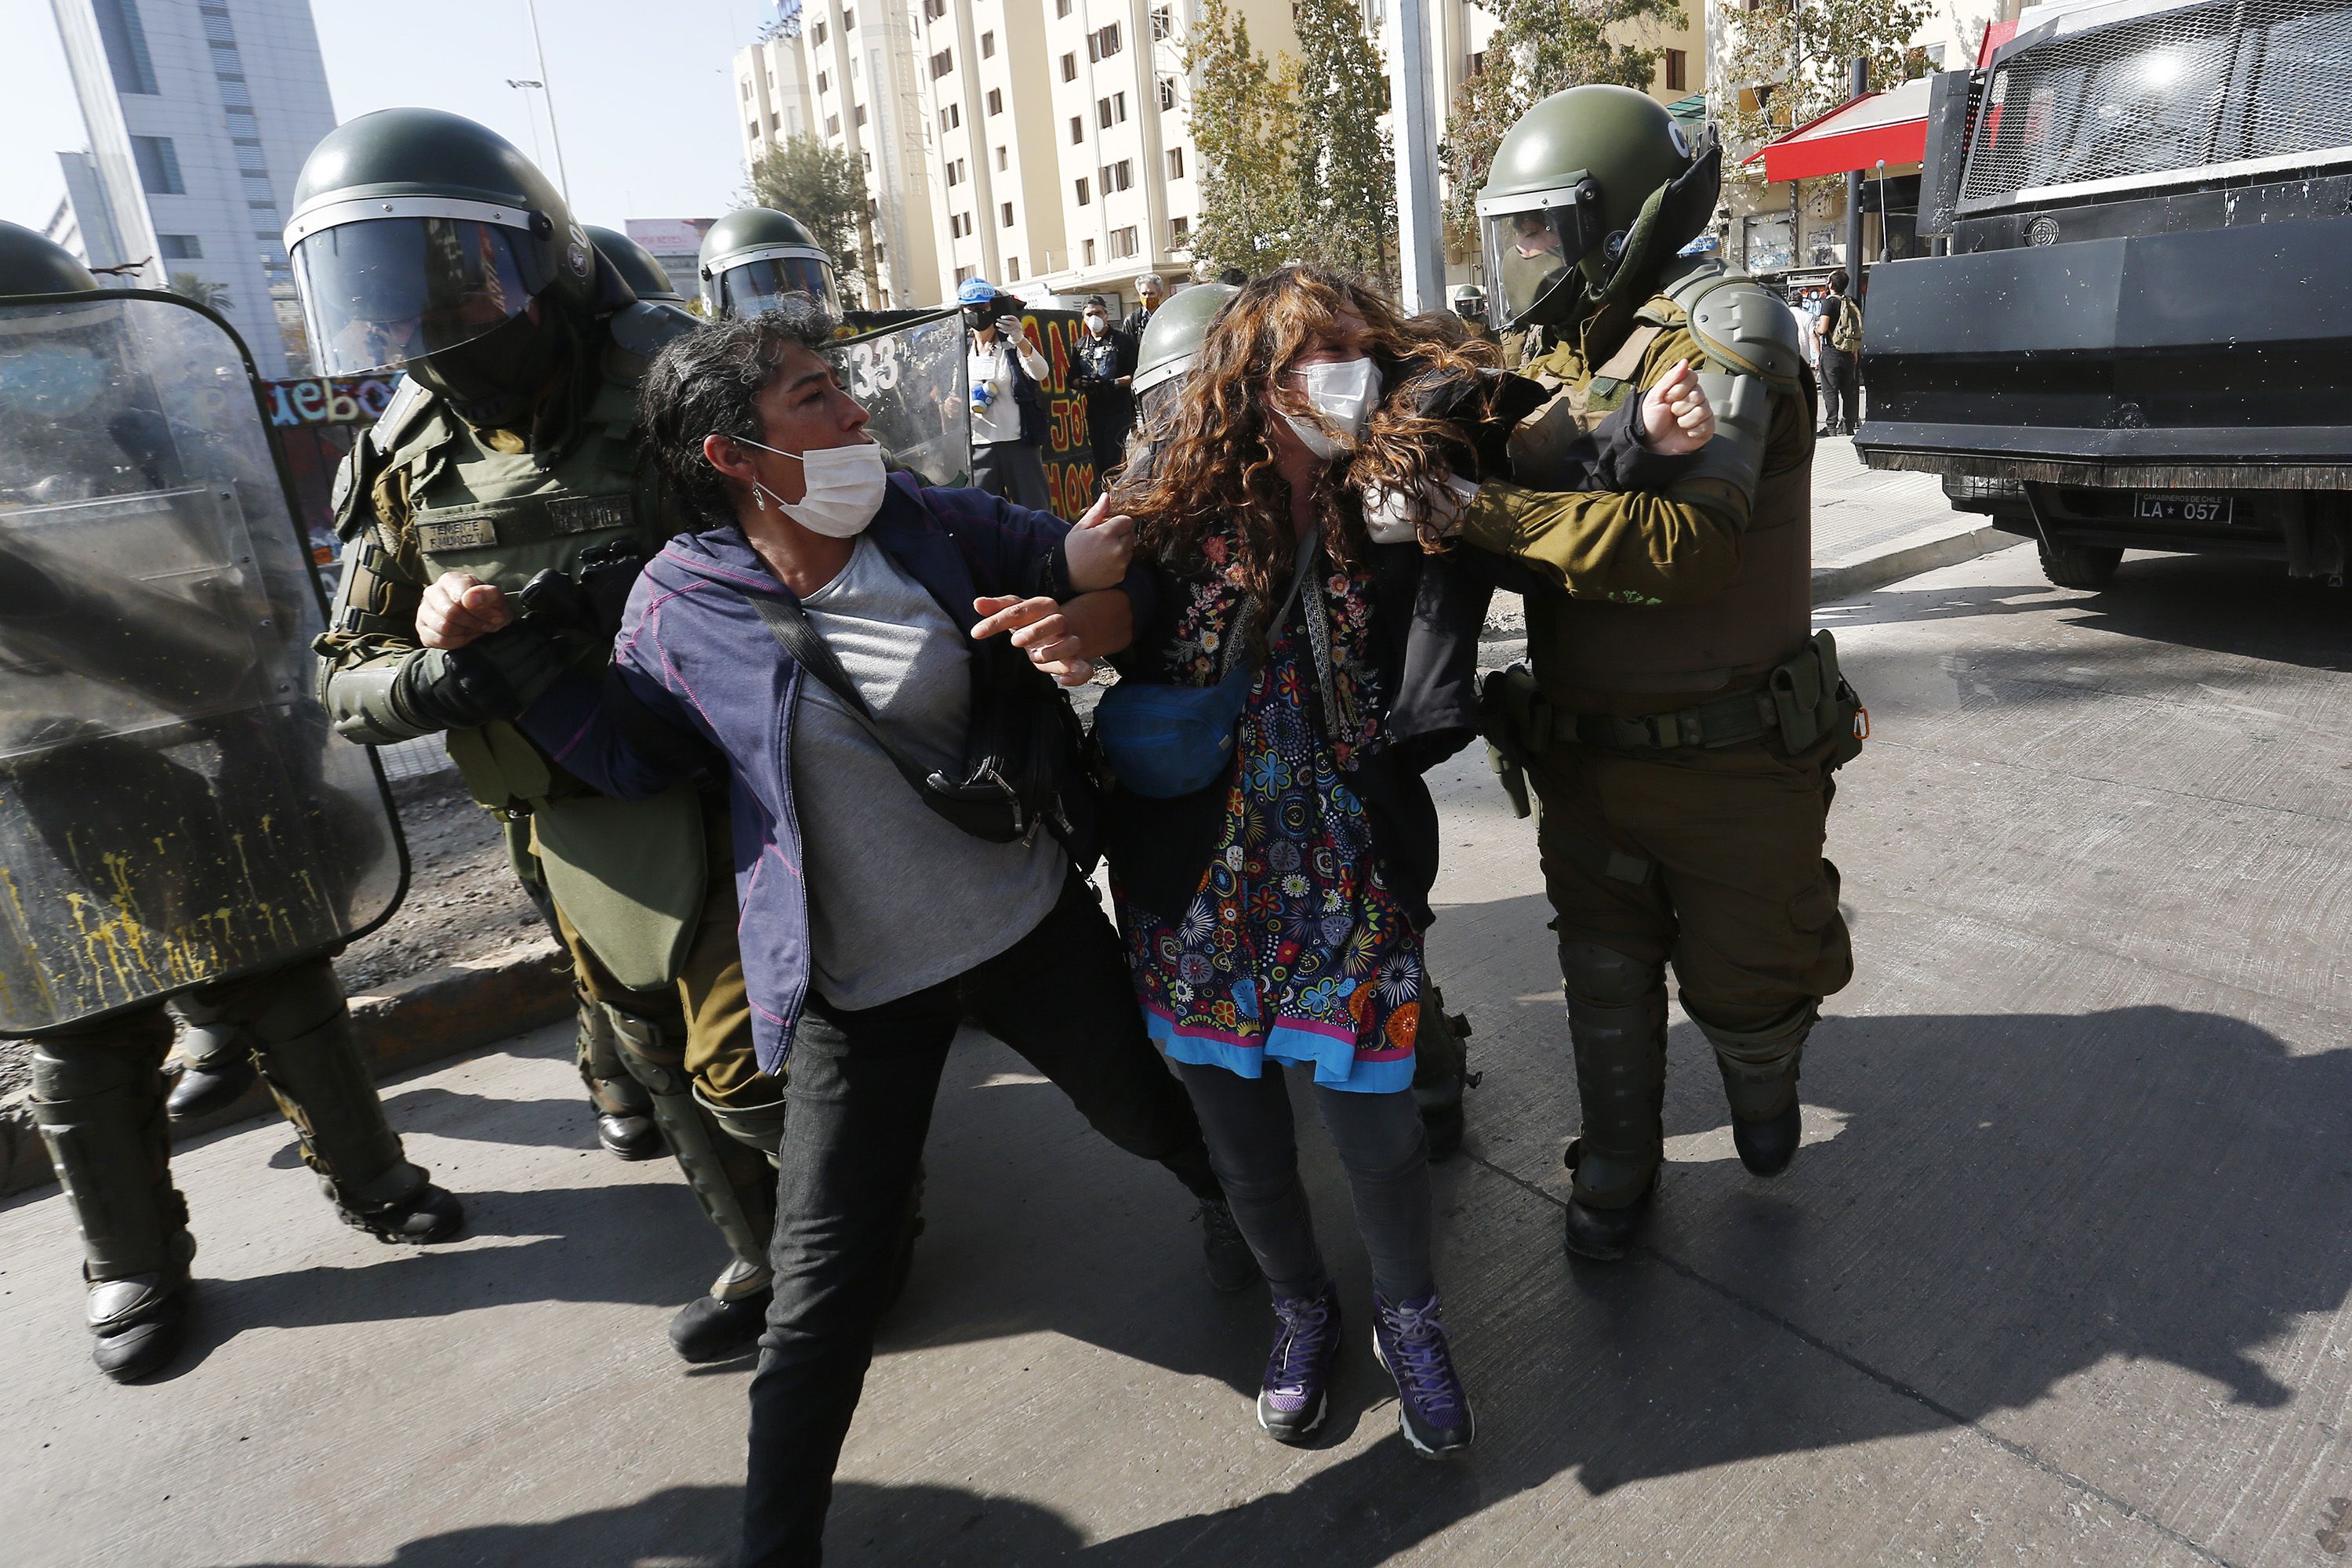 In this image, a masked woman and a masked man are handled by police wearing armor